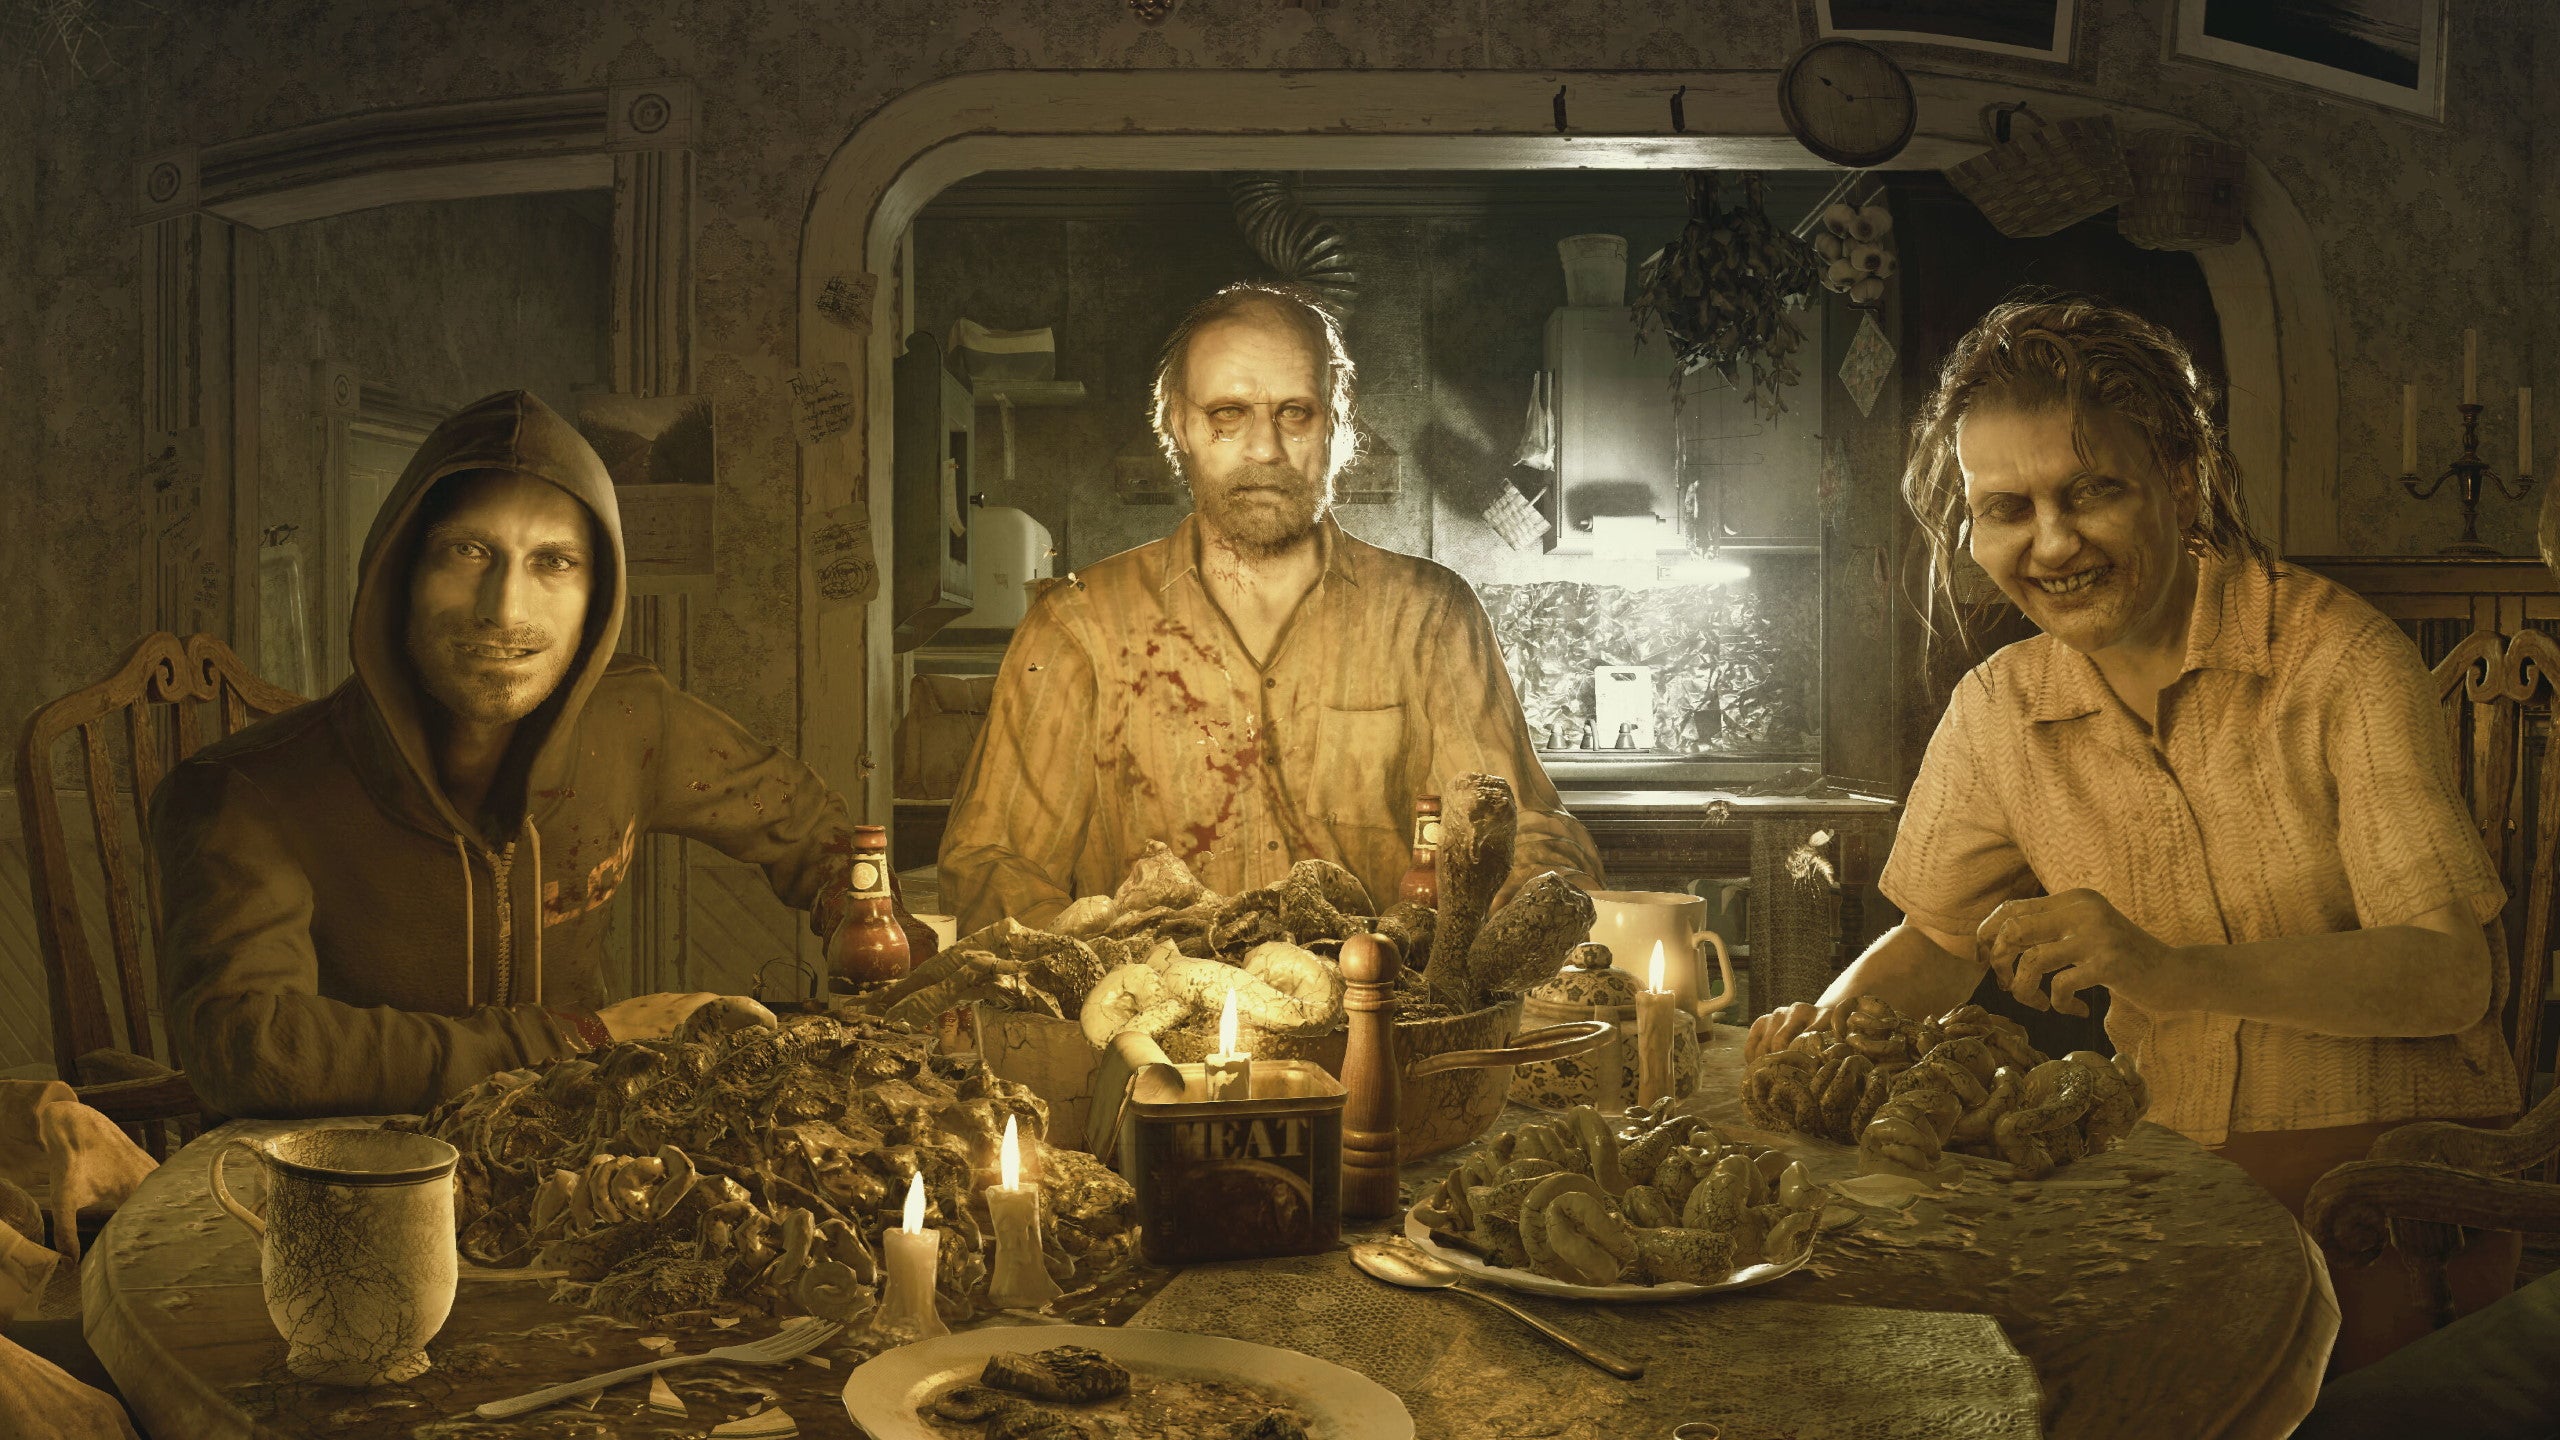 Artwork of the Baker Family from Resident Evil 7, showing a zombie family sitting round a dining room table with plates of gore and mouldy food stuffs.